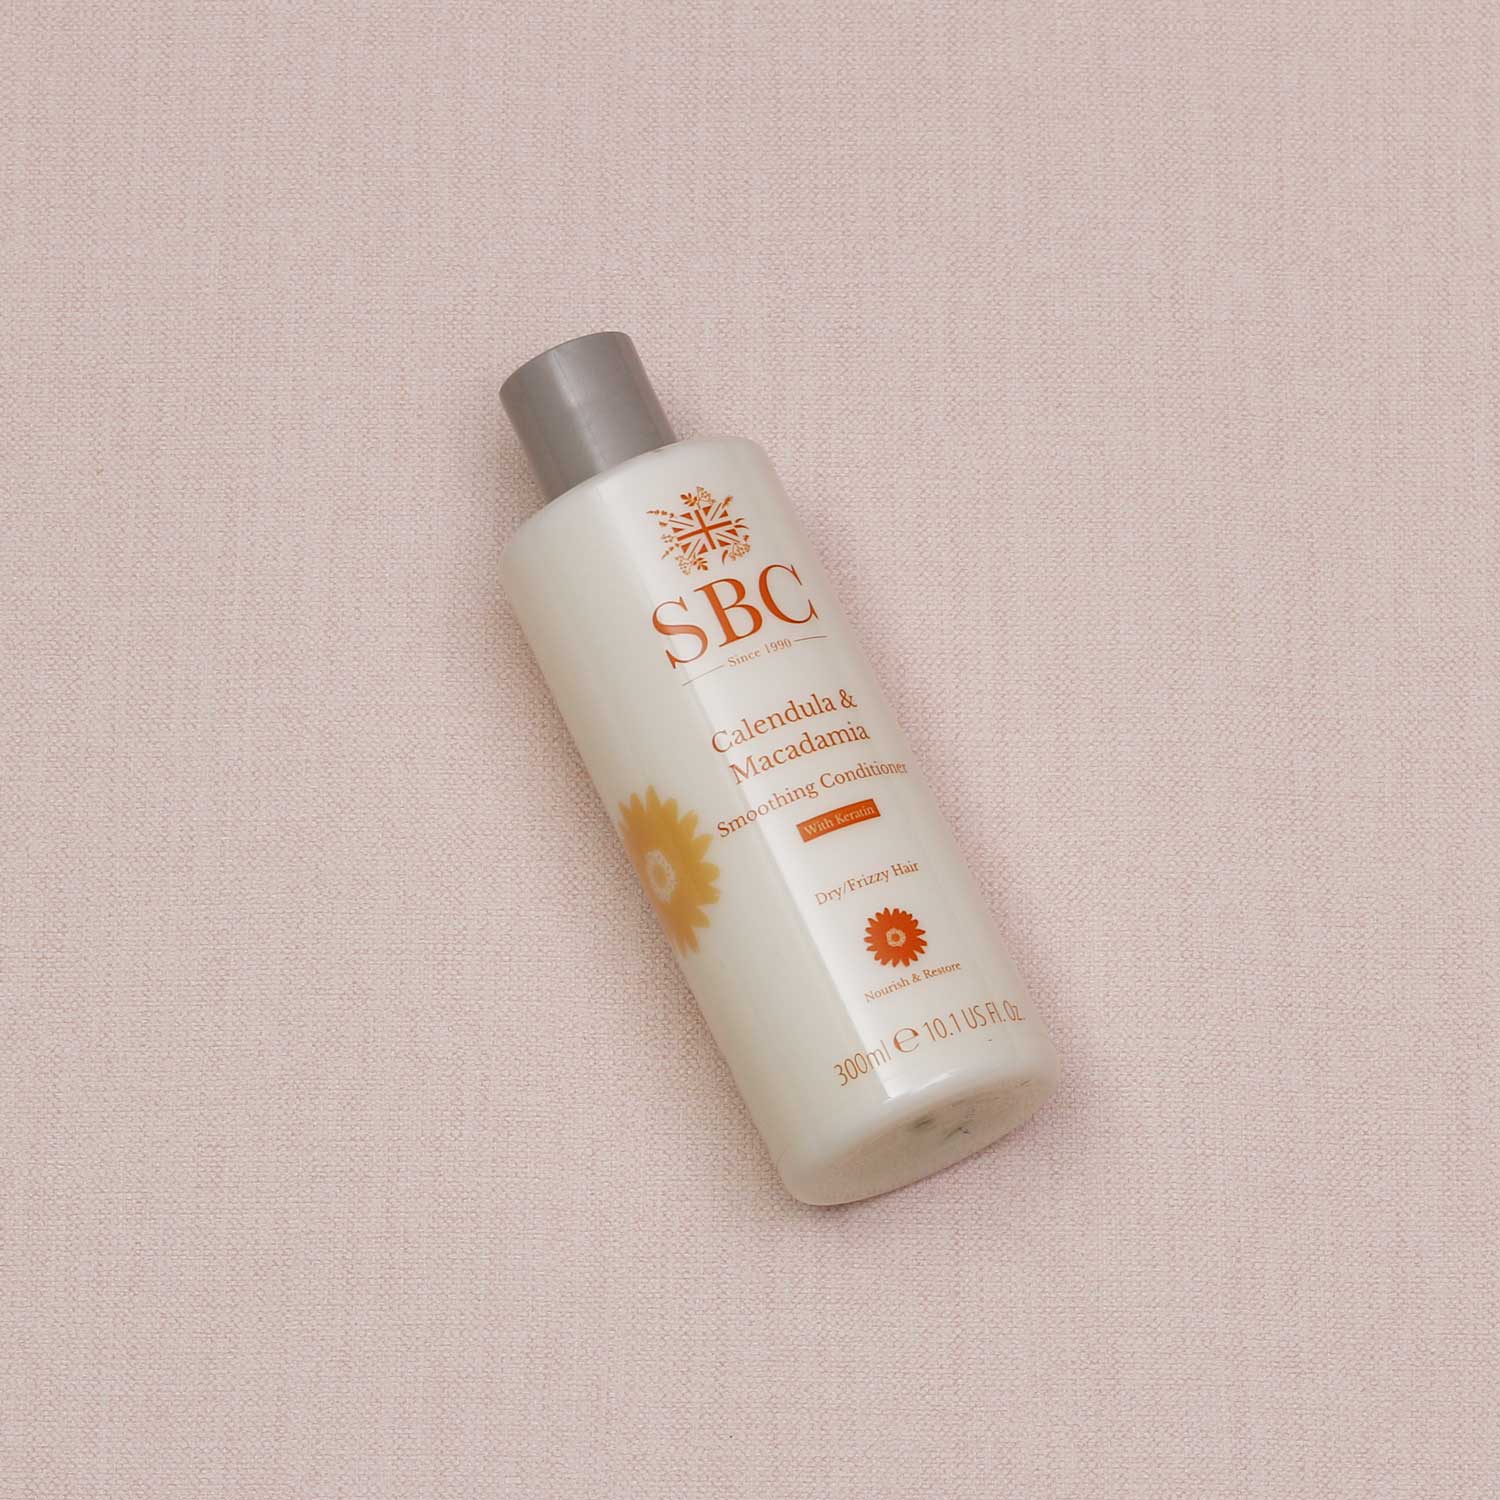 SBC Skincare's Calendula & Macadamia Smoothing Conditioner 300ml on a textured beige background